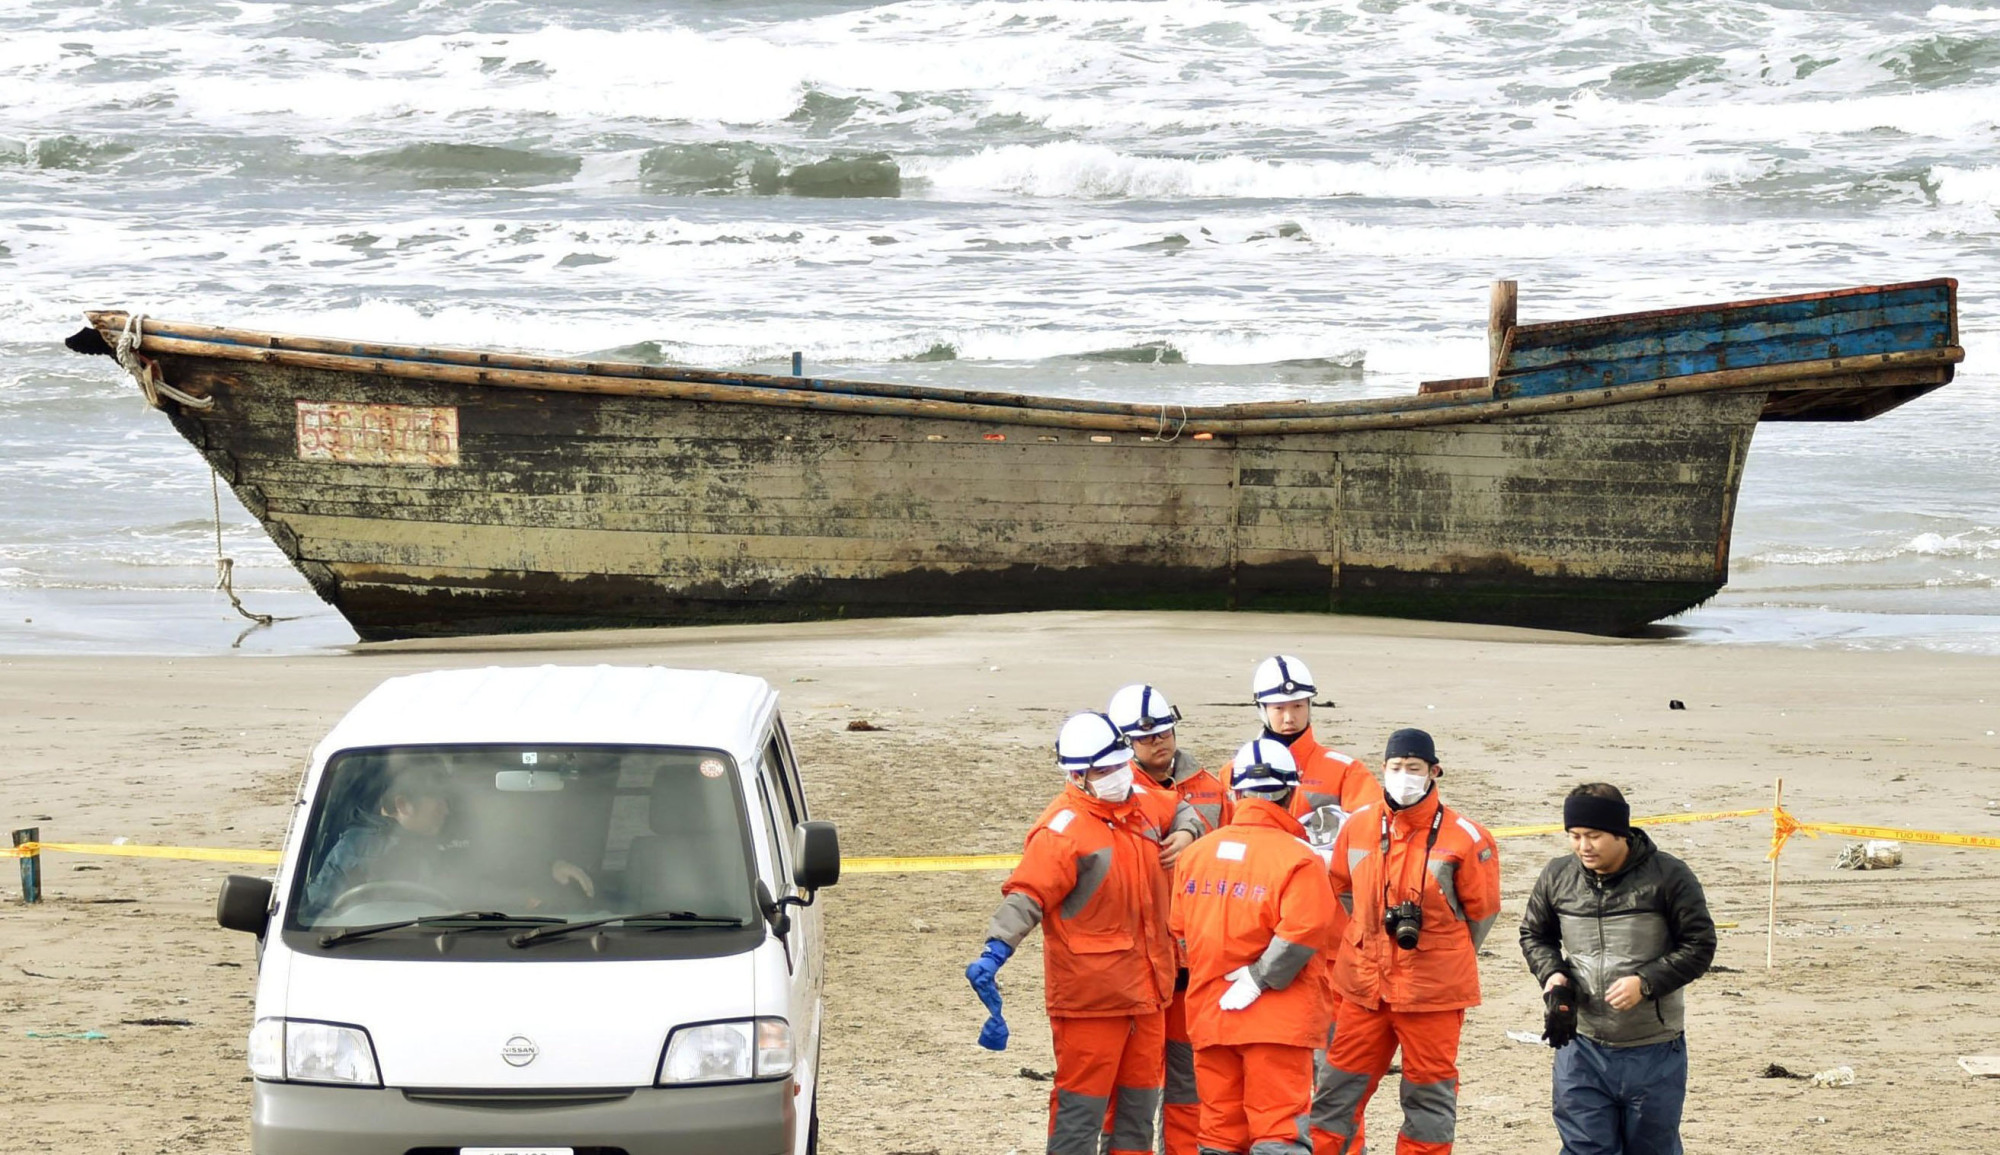 A wooden boat that might have originated in North Korea sits on the beach Monday in Oga, Akita Prefecture. The remains of eight people were found in the boat, which washed ashore Sunday, according to officials at the local branch of the Japan Coast Guard. | KYODO